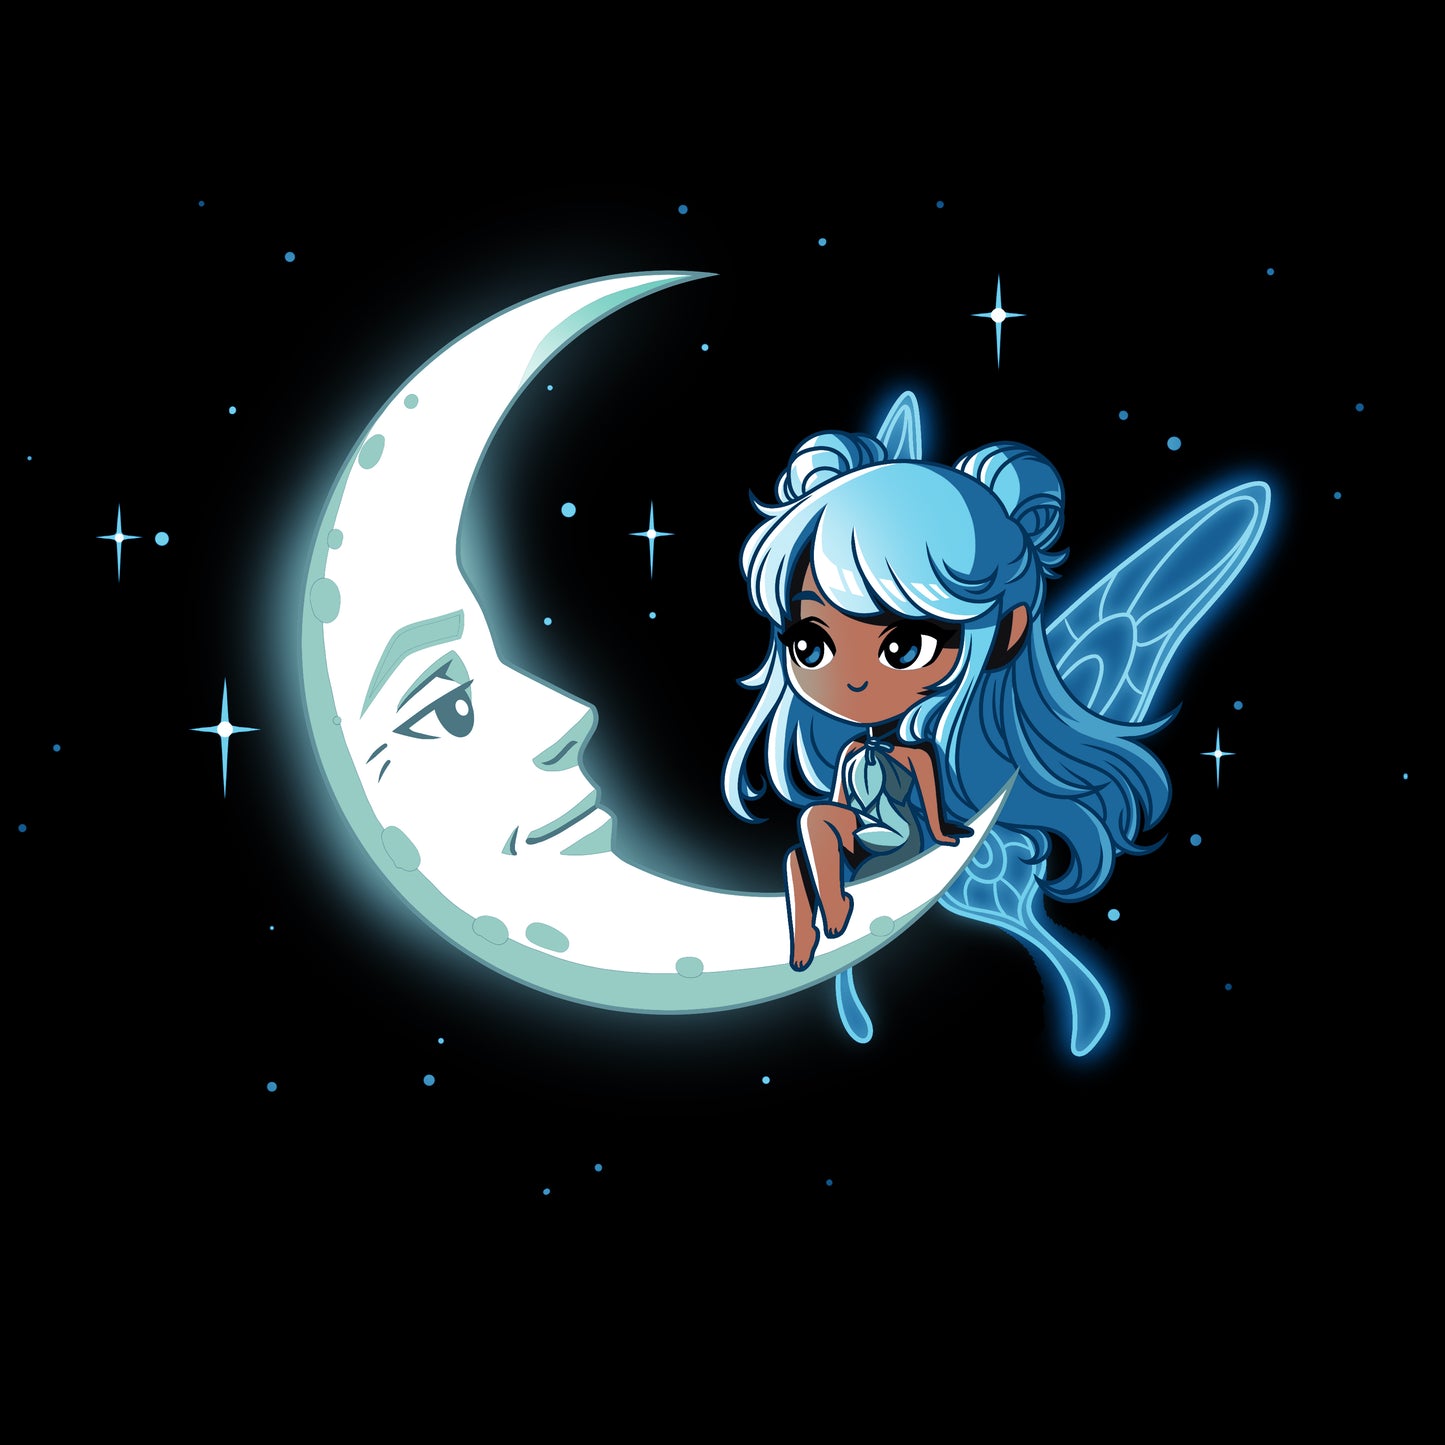 Premium Cotton T-shirt - A Celestial Fairy with blue hair and wings sits on a crescent moon with a face, surrounded by stars against a black background on this monsterdigital Celestial Fairy black apparel made of Super Soft Ringspun Cotton.